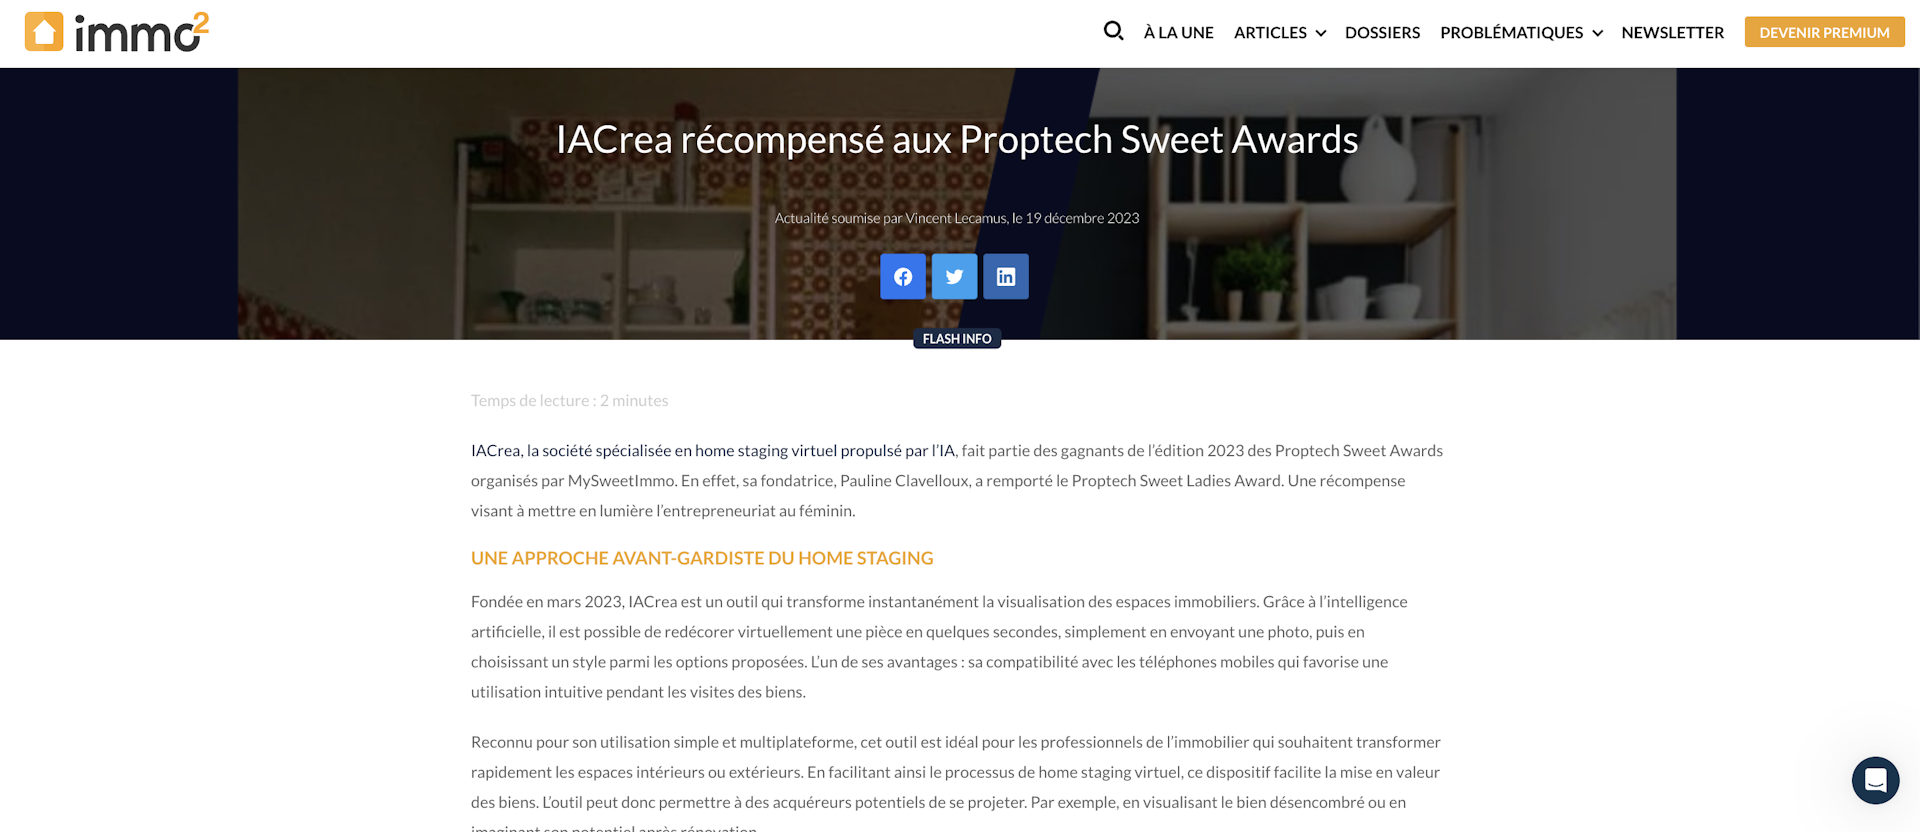 IACrea awarded at the Proptech Sweet Awards - Article by Immo2